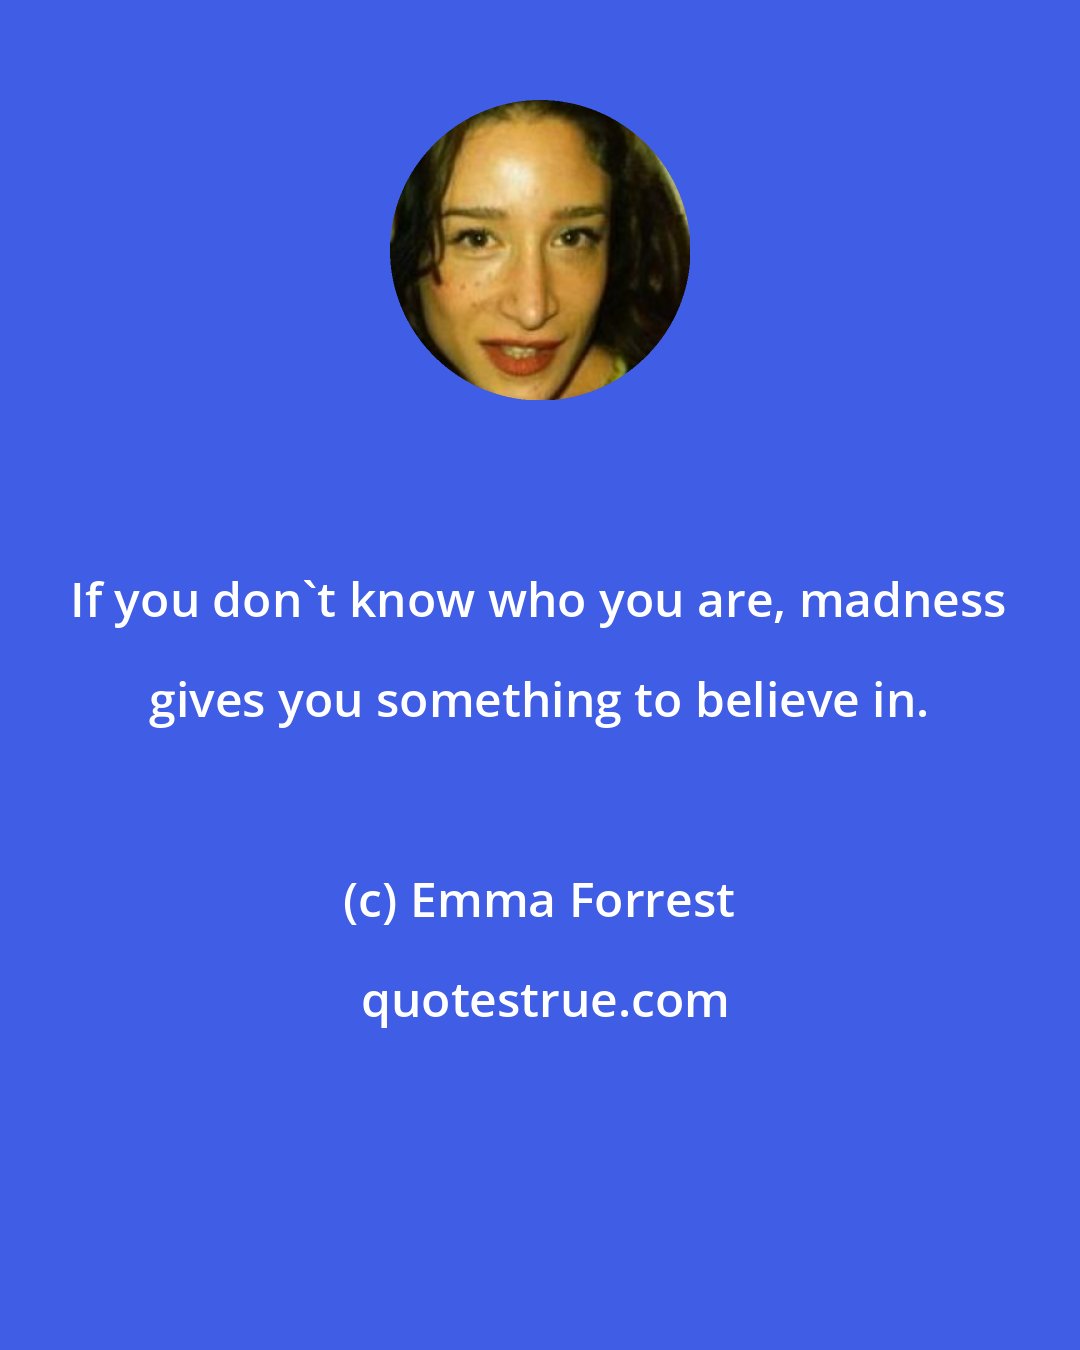 Emma Forrest: If you don't know who you are, madness gives you something to believe in.